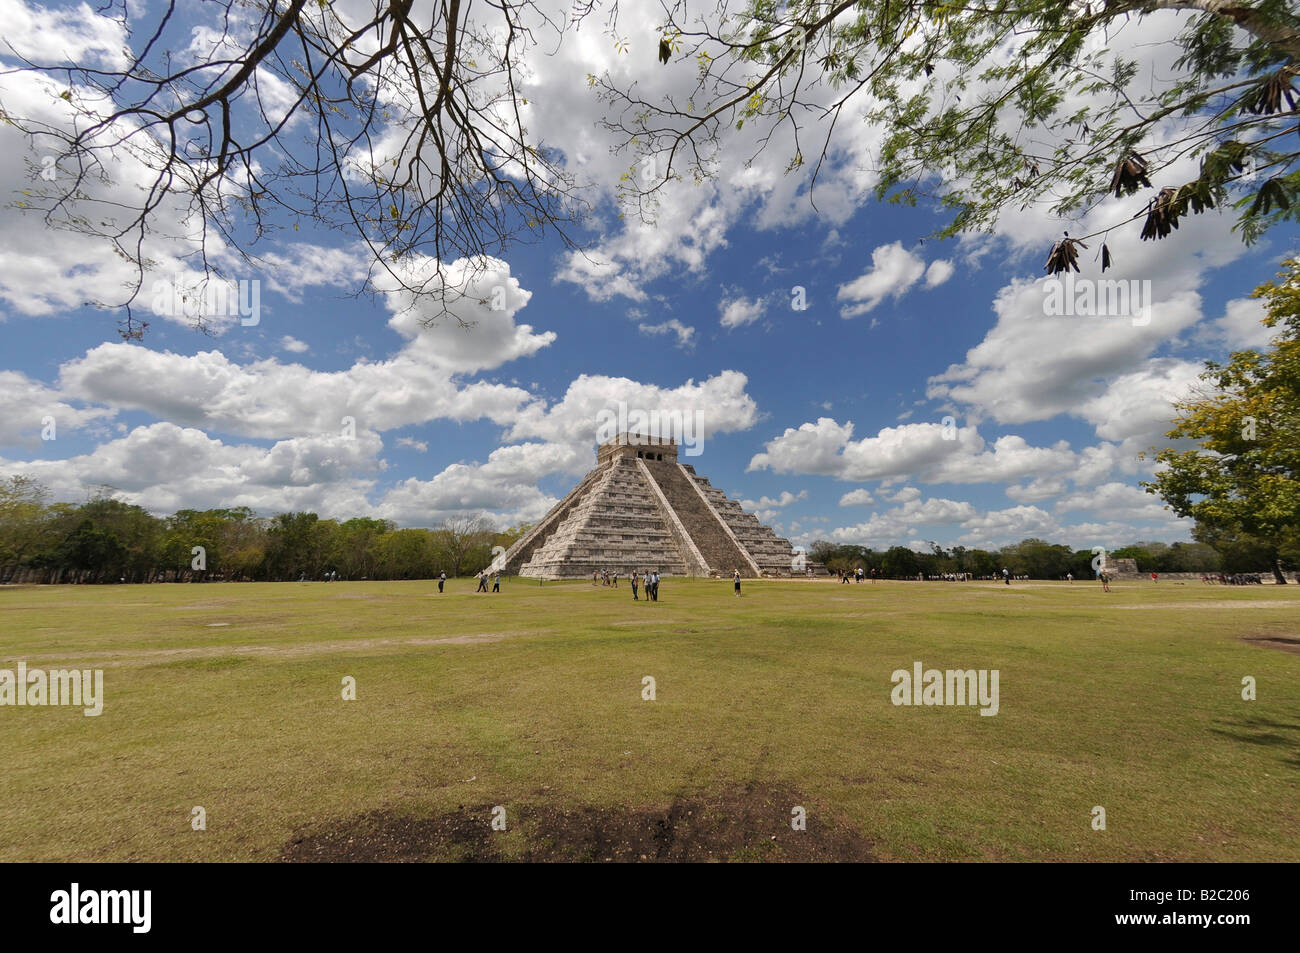 Temple of Kukulkan Pyramid, Zona Nord, Chichen-itza, new wonder of the world, Mayan and Toltec archaeological excavation, Yucat Stock Photo